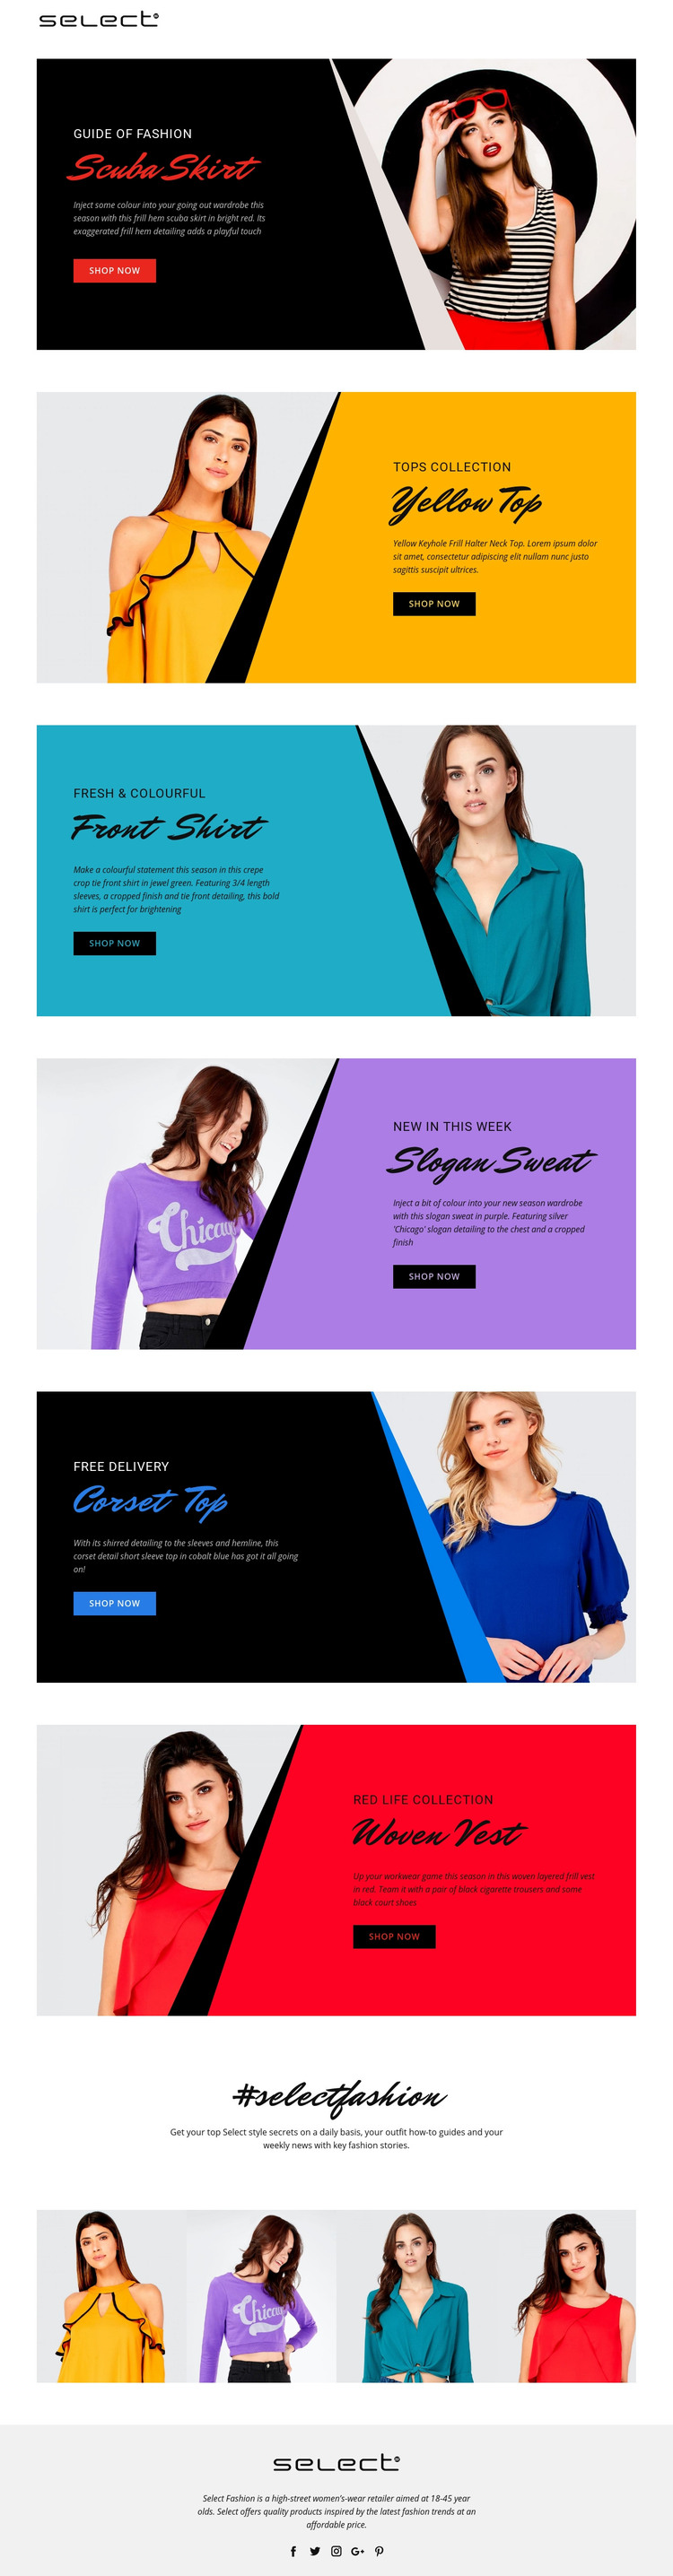 Learn about dress codes Homepage Design